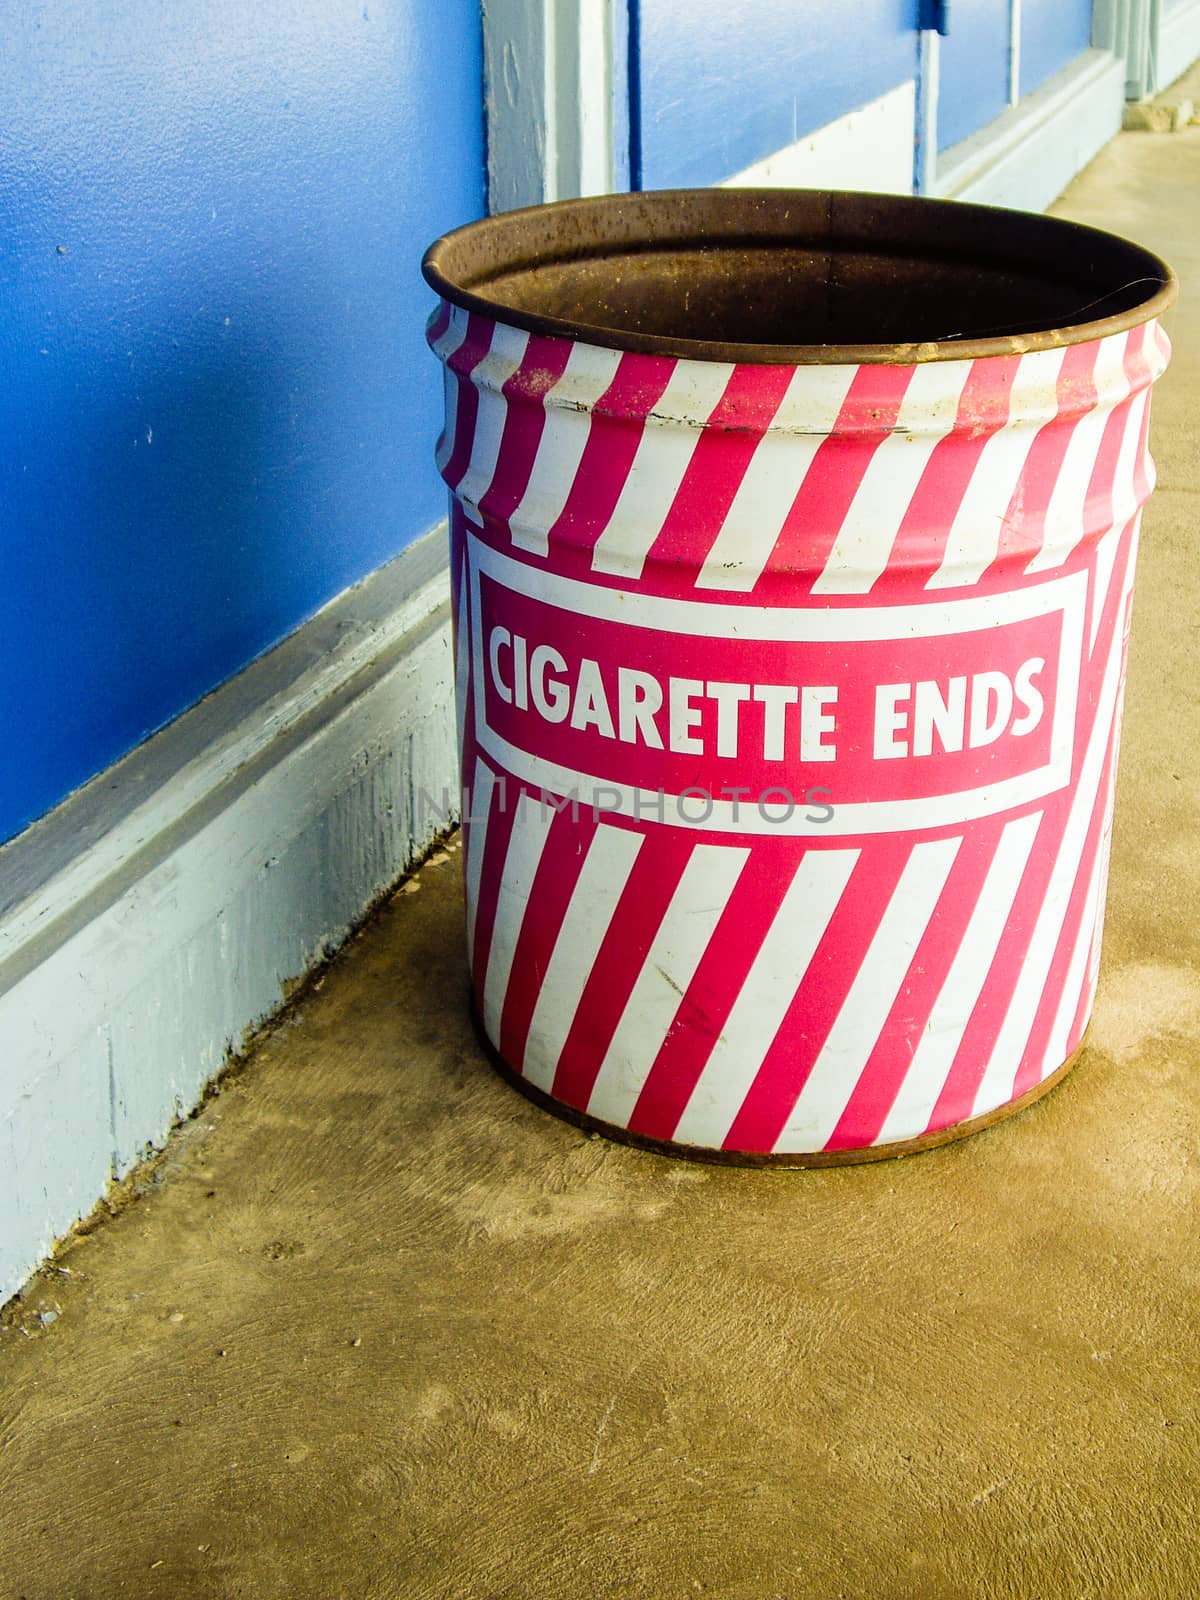 Large ashcan for cigarette disposal